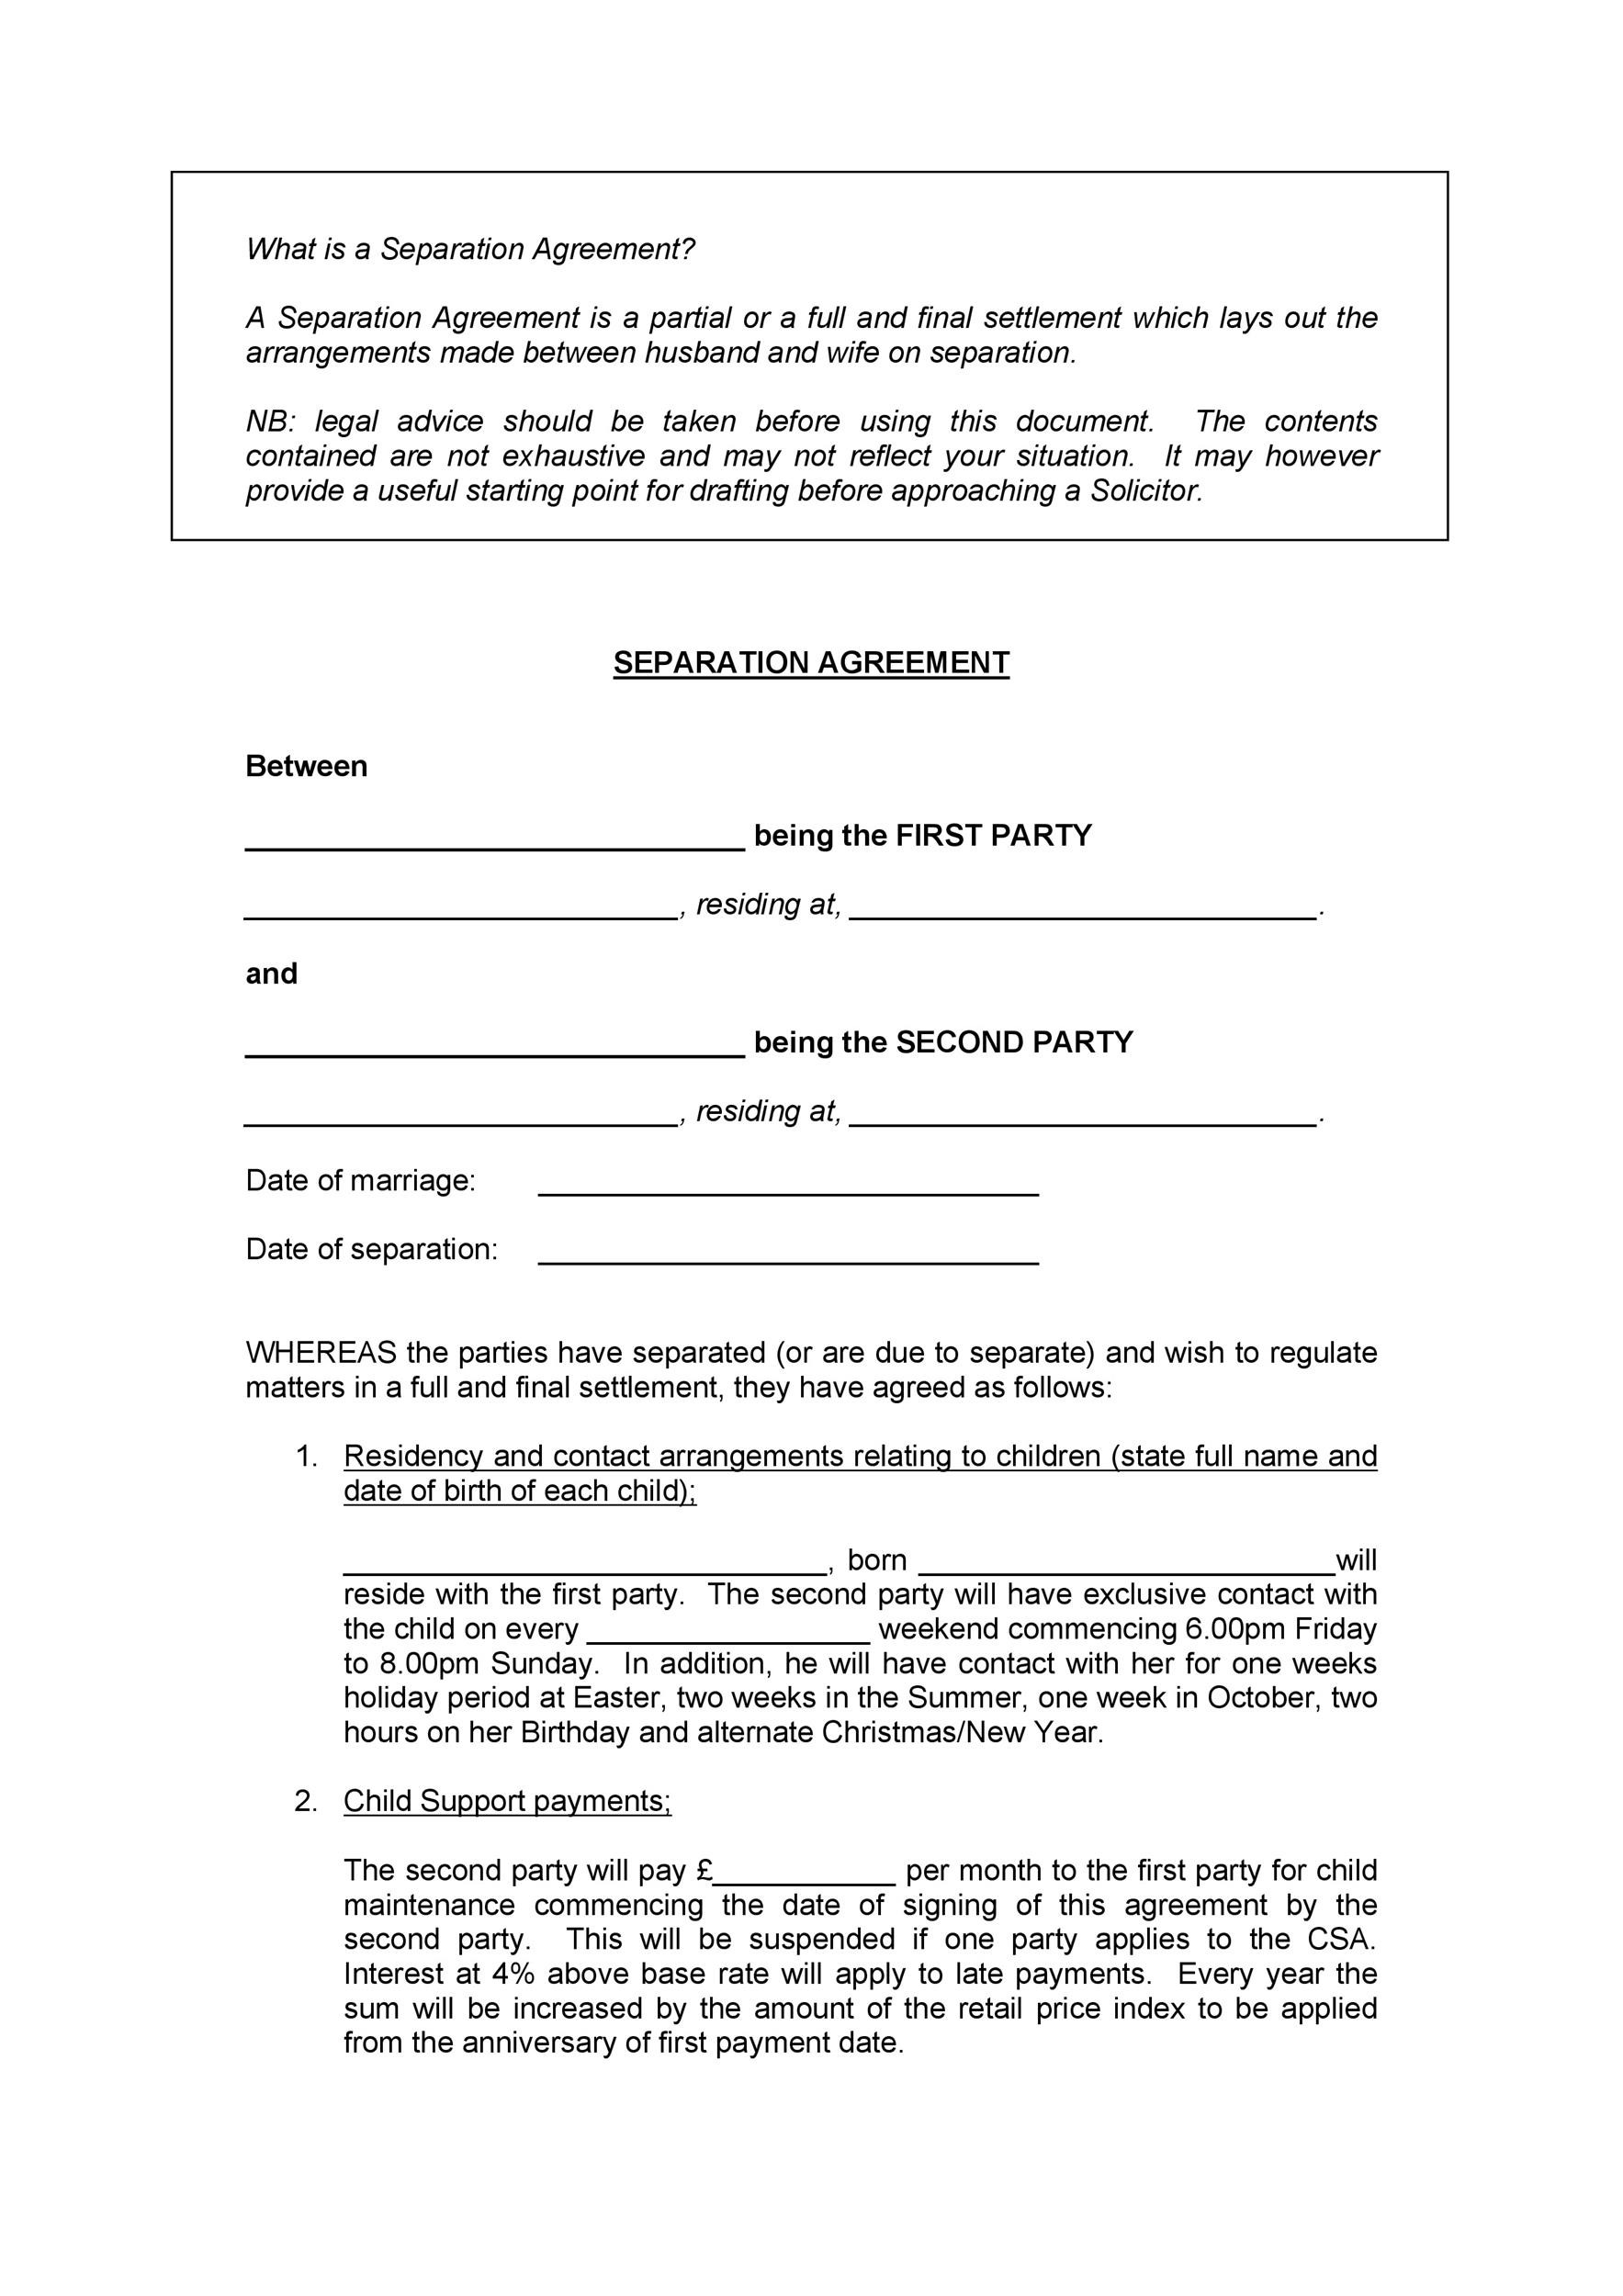 Separation Agreement Template In Word And Pdf Formats Page 4 Of 5 ASKxz